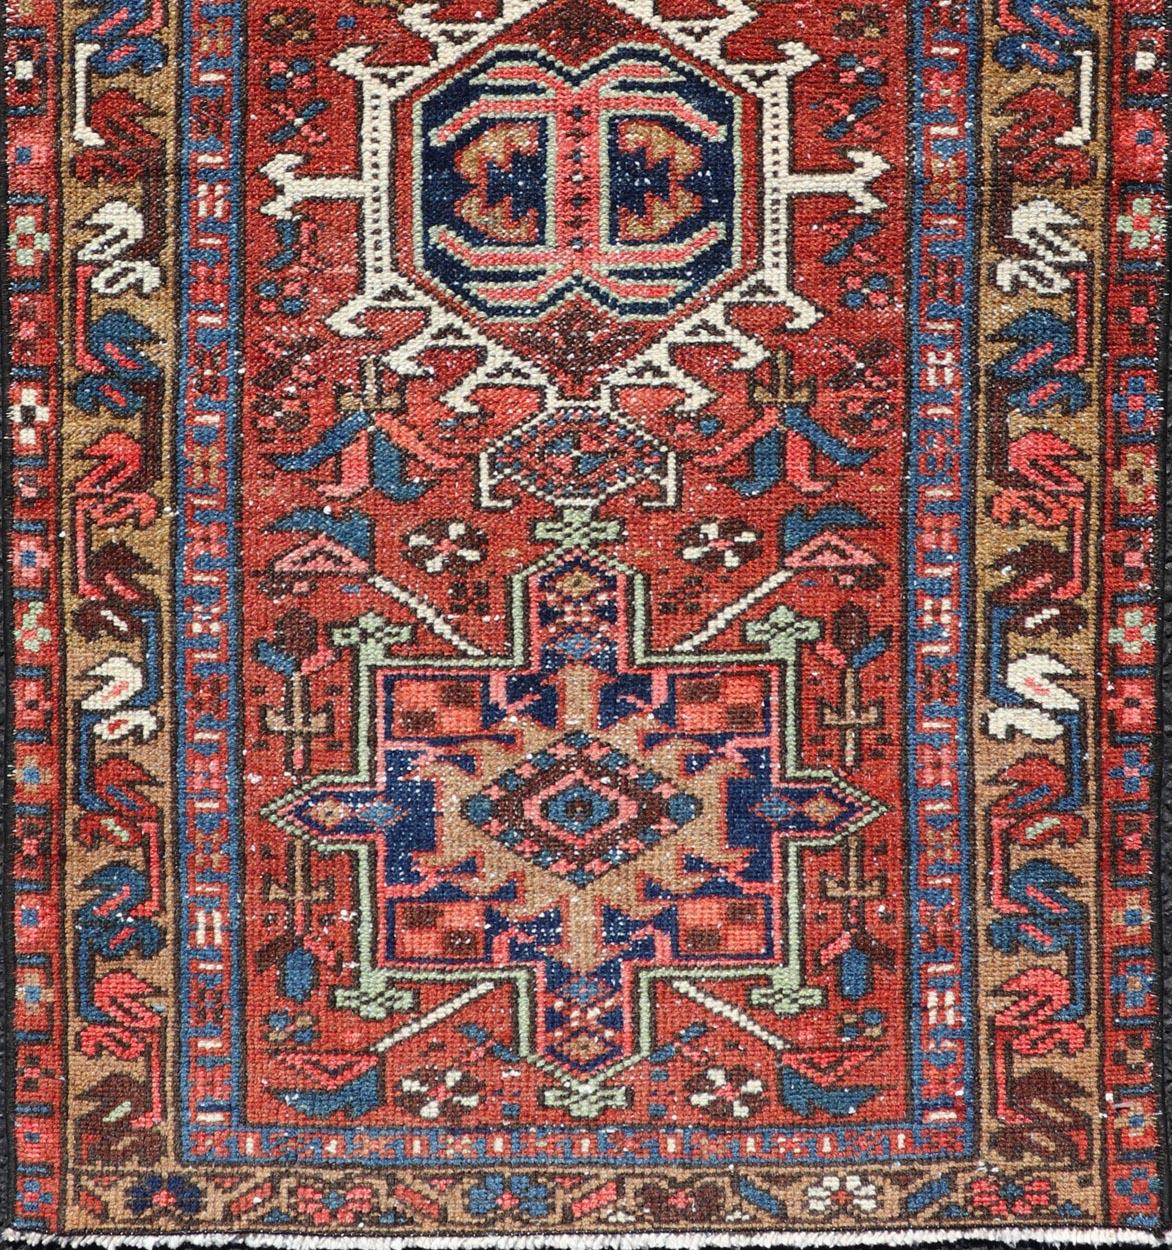 Measures: 2'0 x 3'1 
Antique Colorful Persian Heriz Rug with a Bold Geometric Design. Keivan Woven Arts / rug EMB-22177-15024, country of origin / type: Persian / Heriz, circa Early-20th Century.

This Persian Heriz features a classic